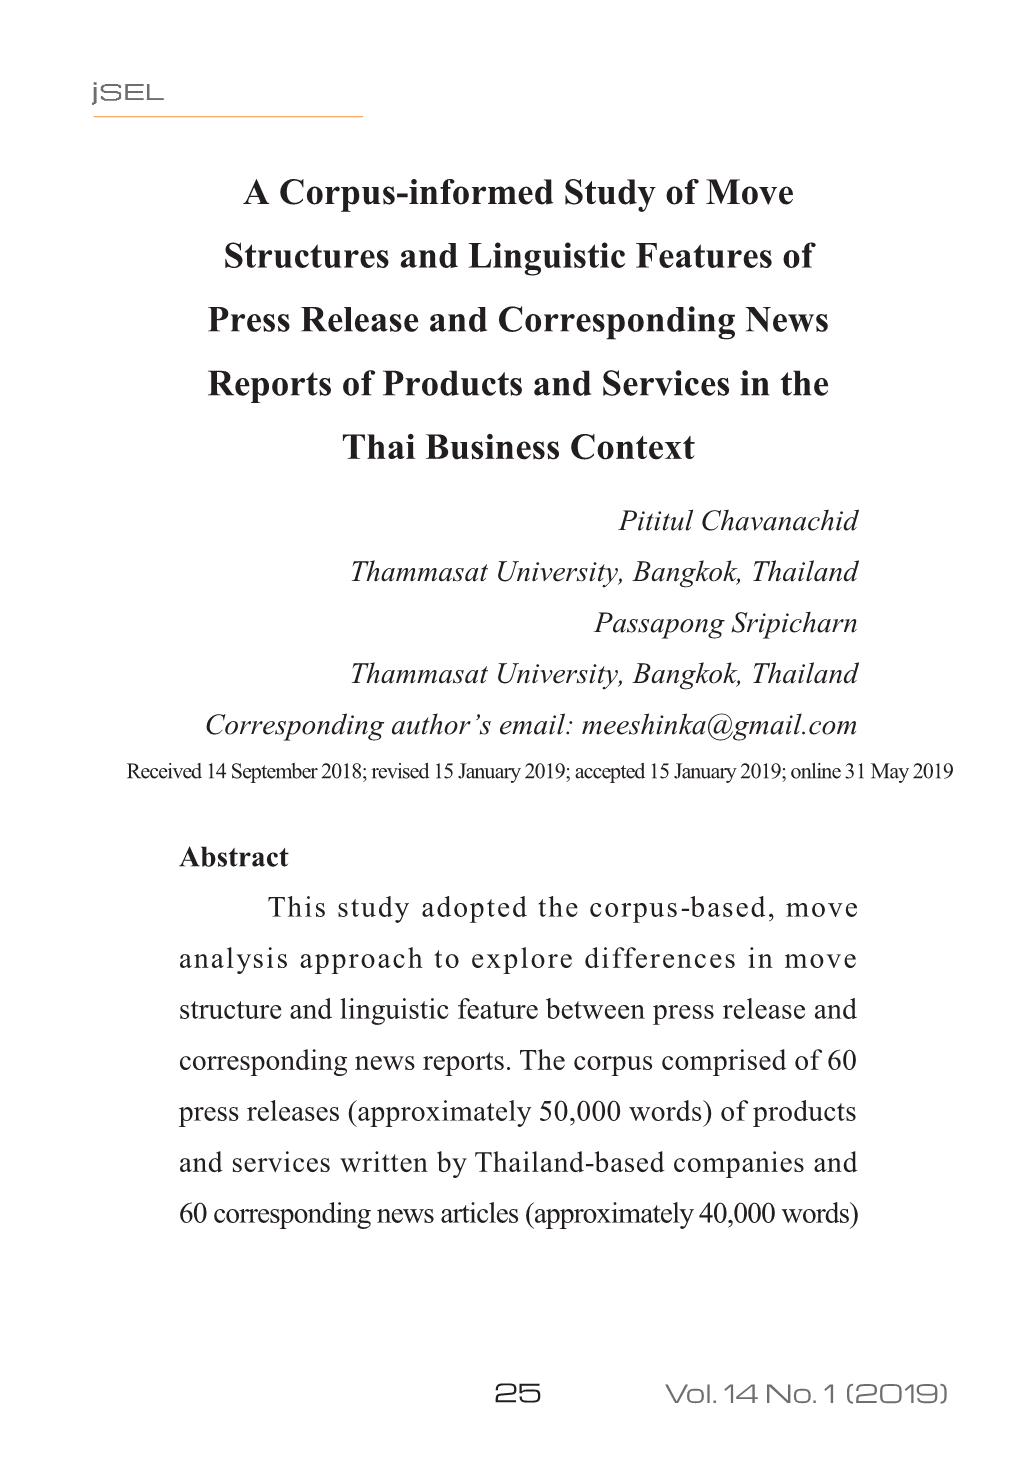 A Corpus-Informed Study of Move Structures and Linguistic Features of Press Release and Corresponding News Reports of Products A